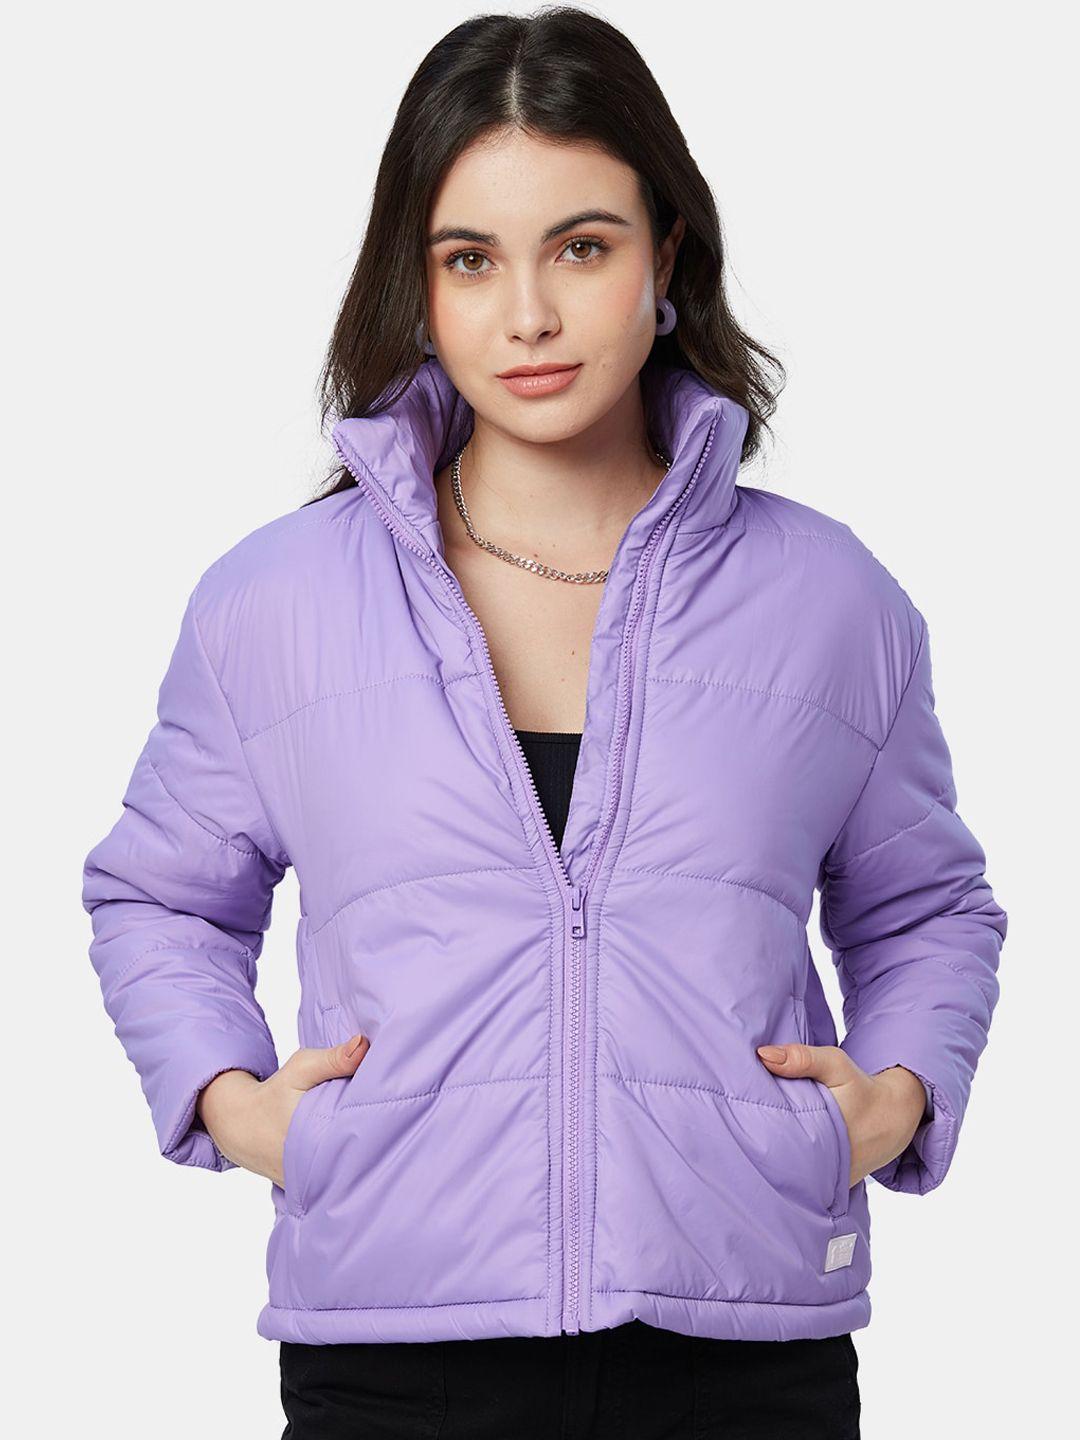 the souled store women puffer jacket